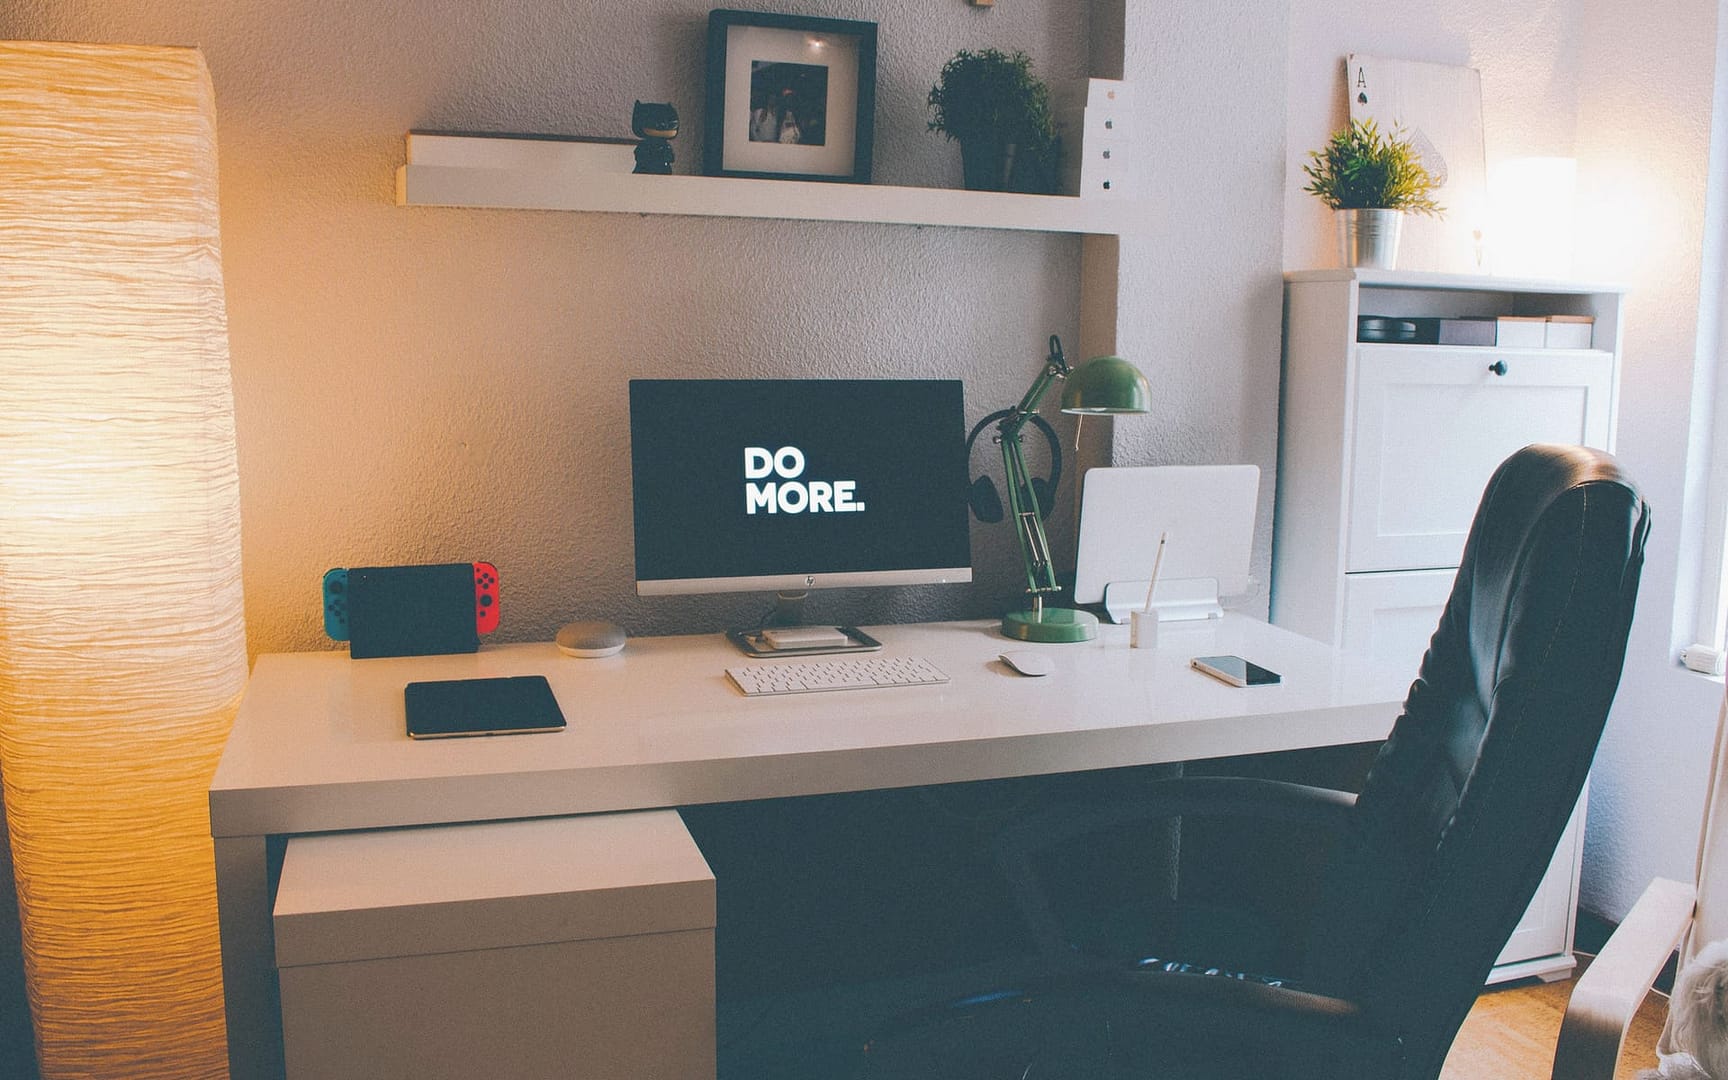 Computer on a desk with the words "Do more" on the screen